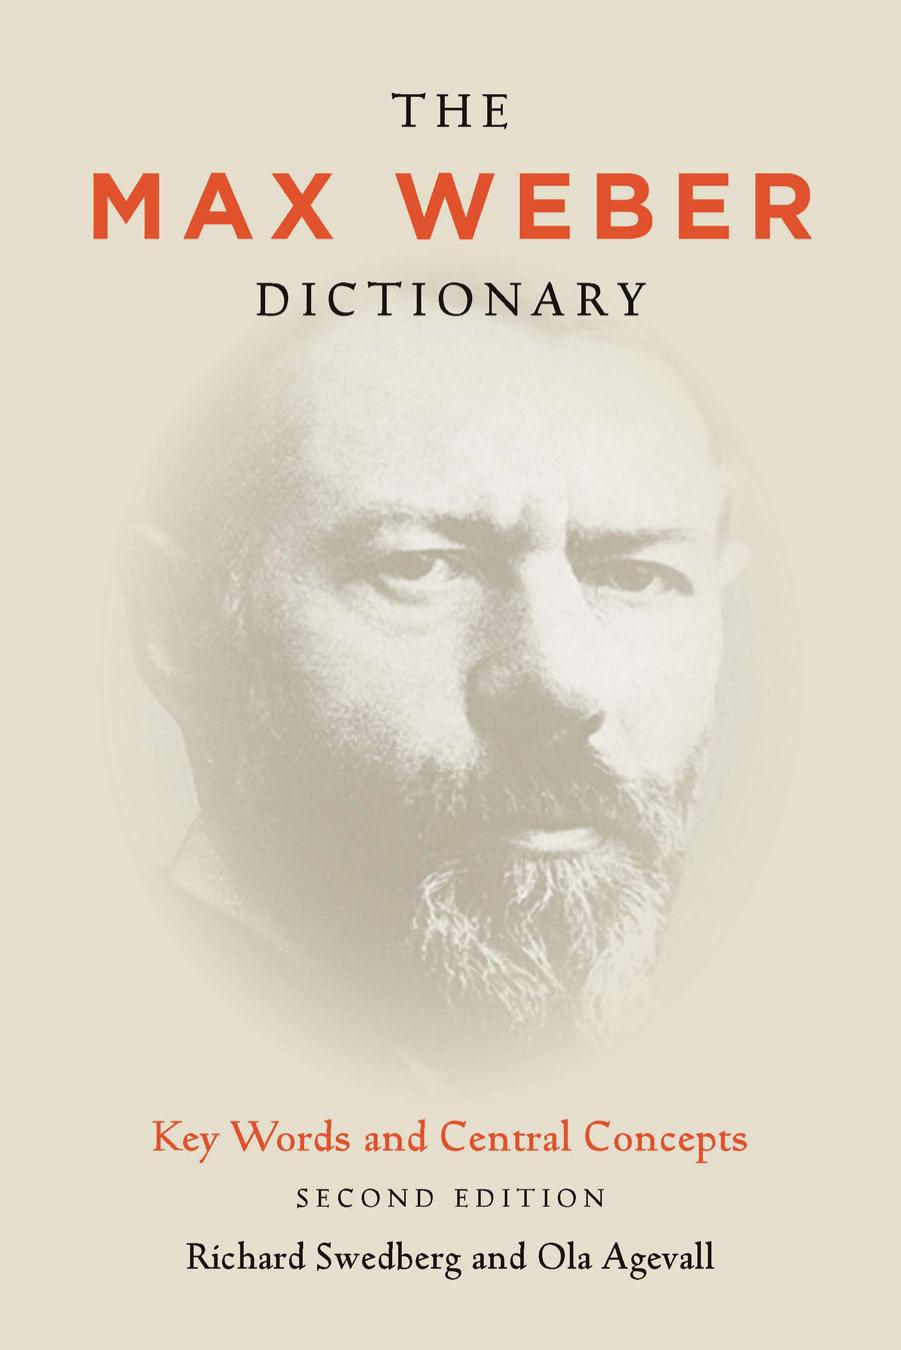 The Max Weber Dictionary: Key Words and Central Concepts, Second Edition